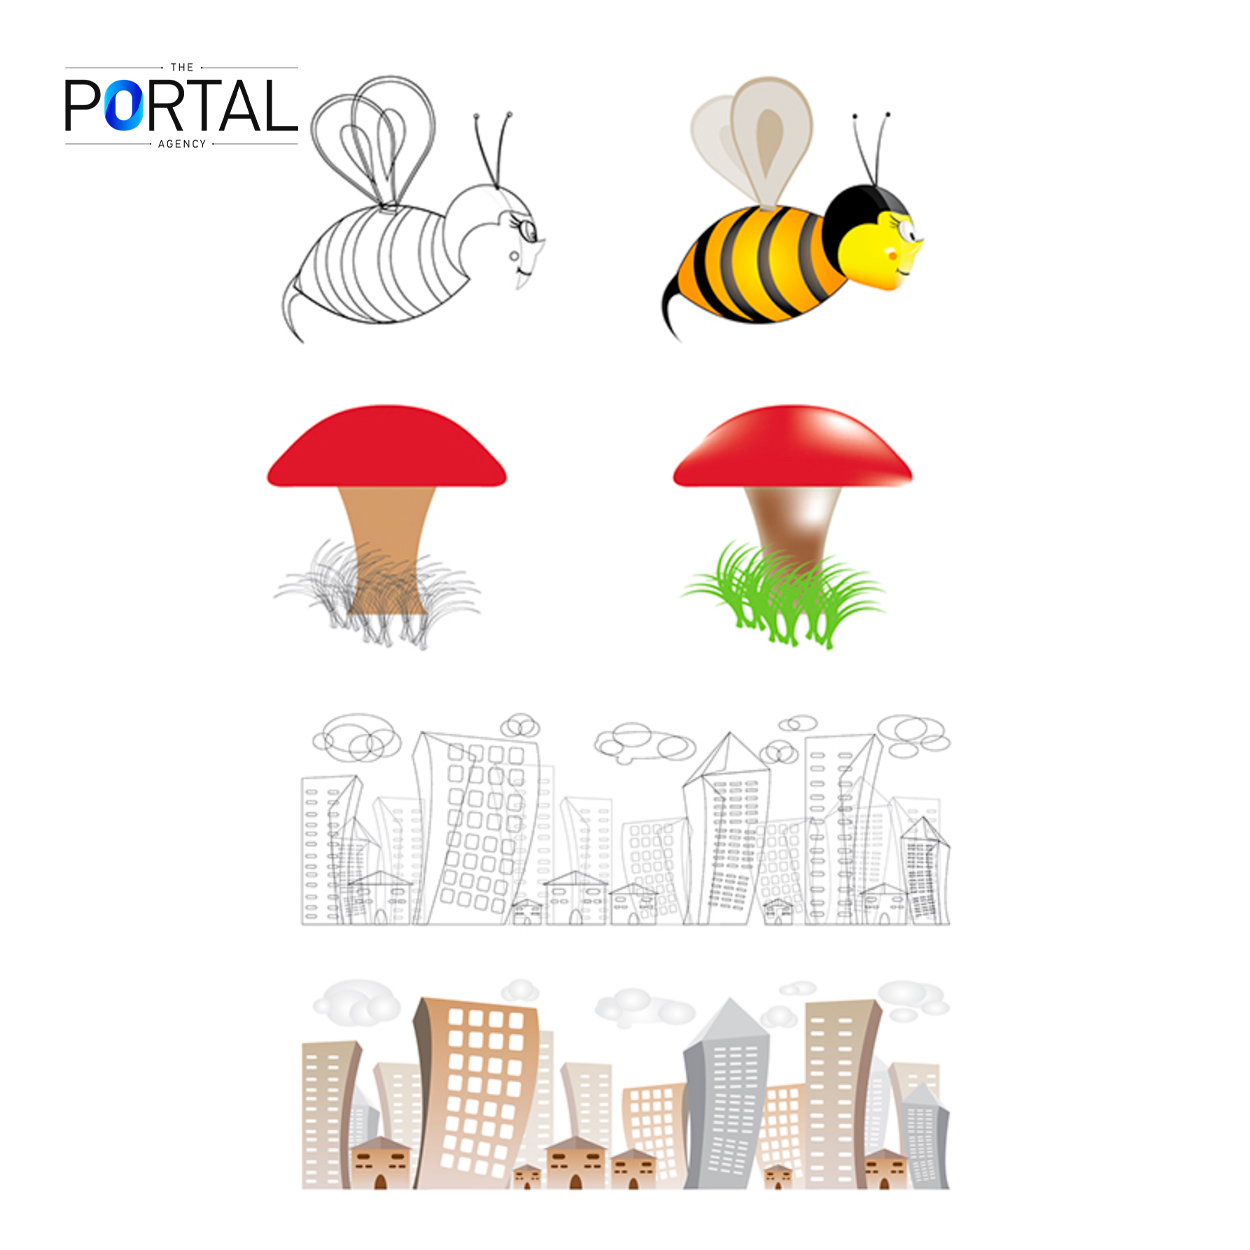 https://theportalagency.com/project/betty-bee-mobile-app/